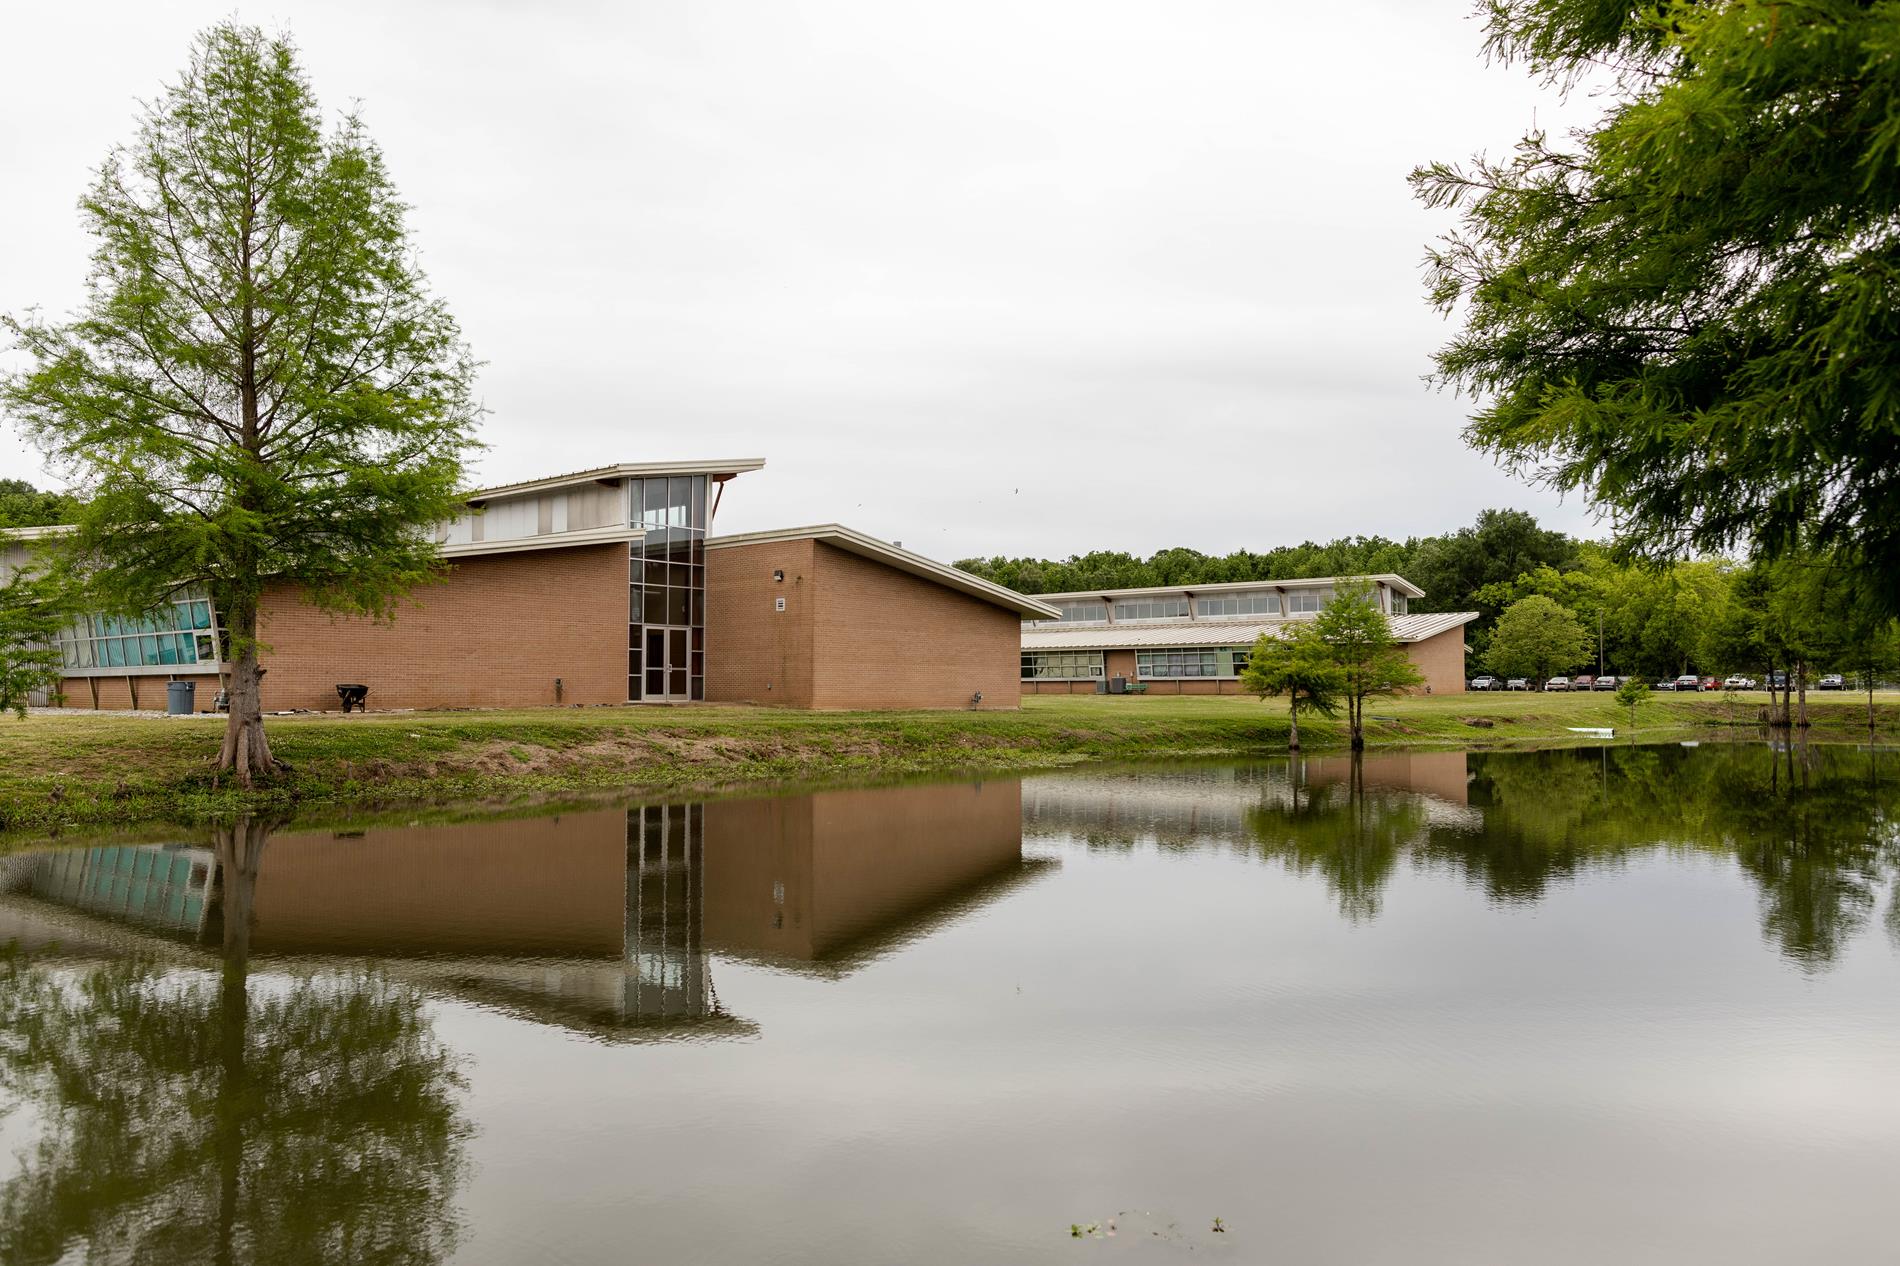 School buildings by the pond